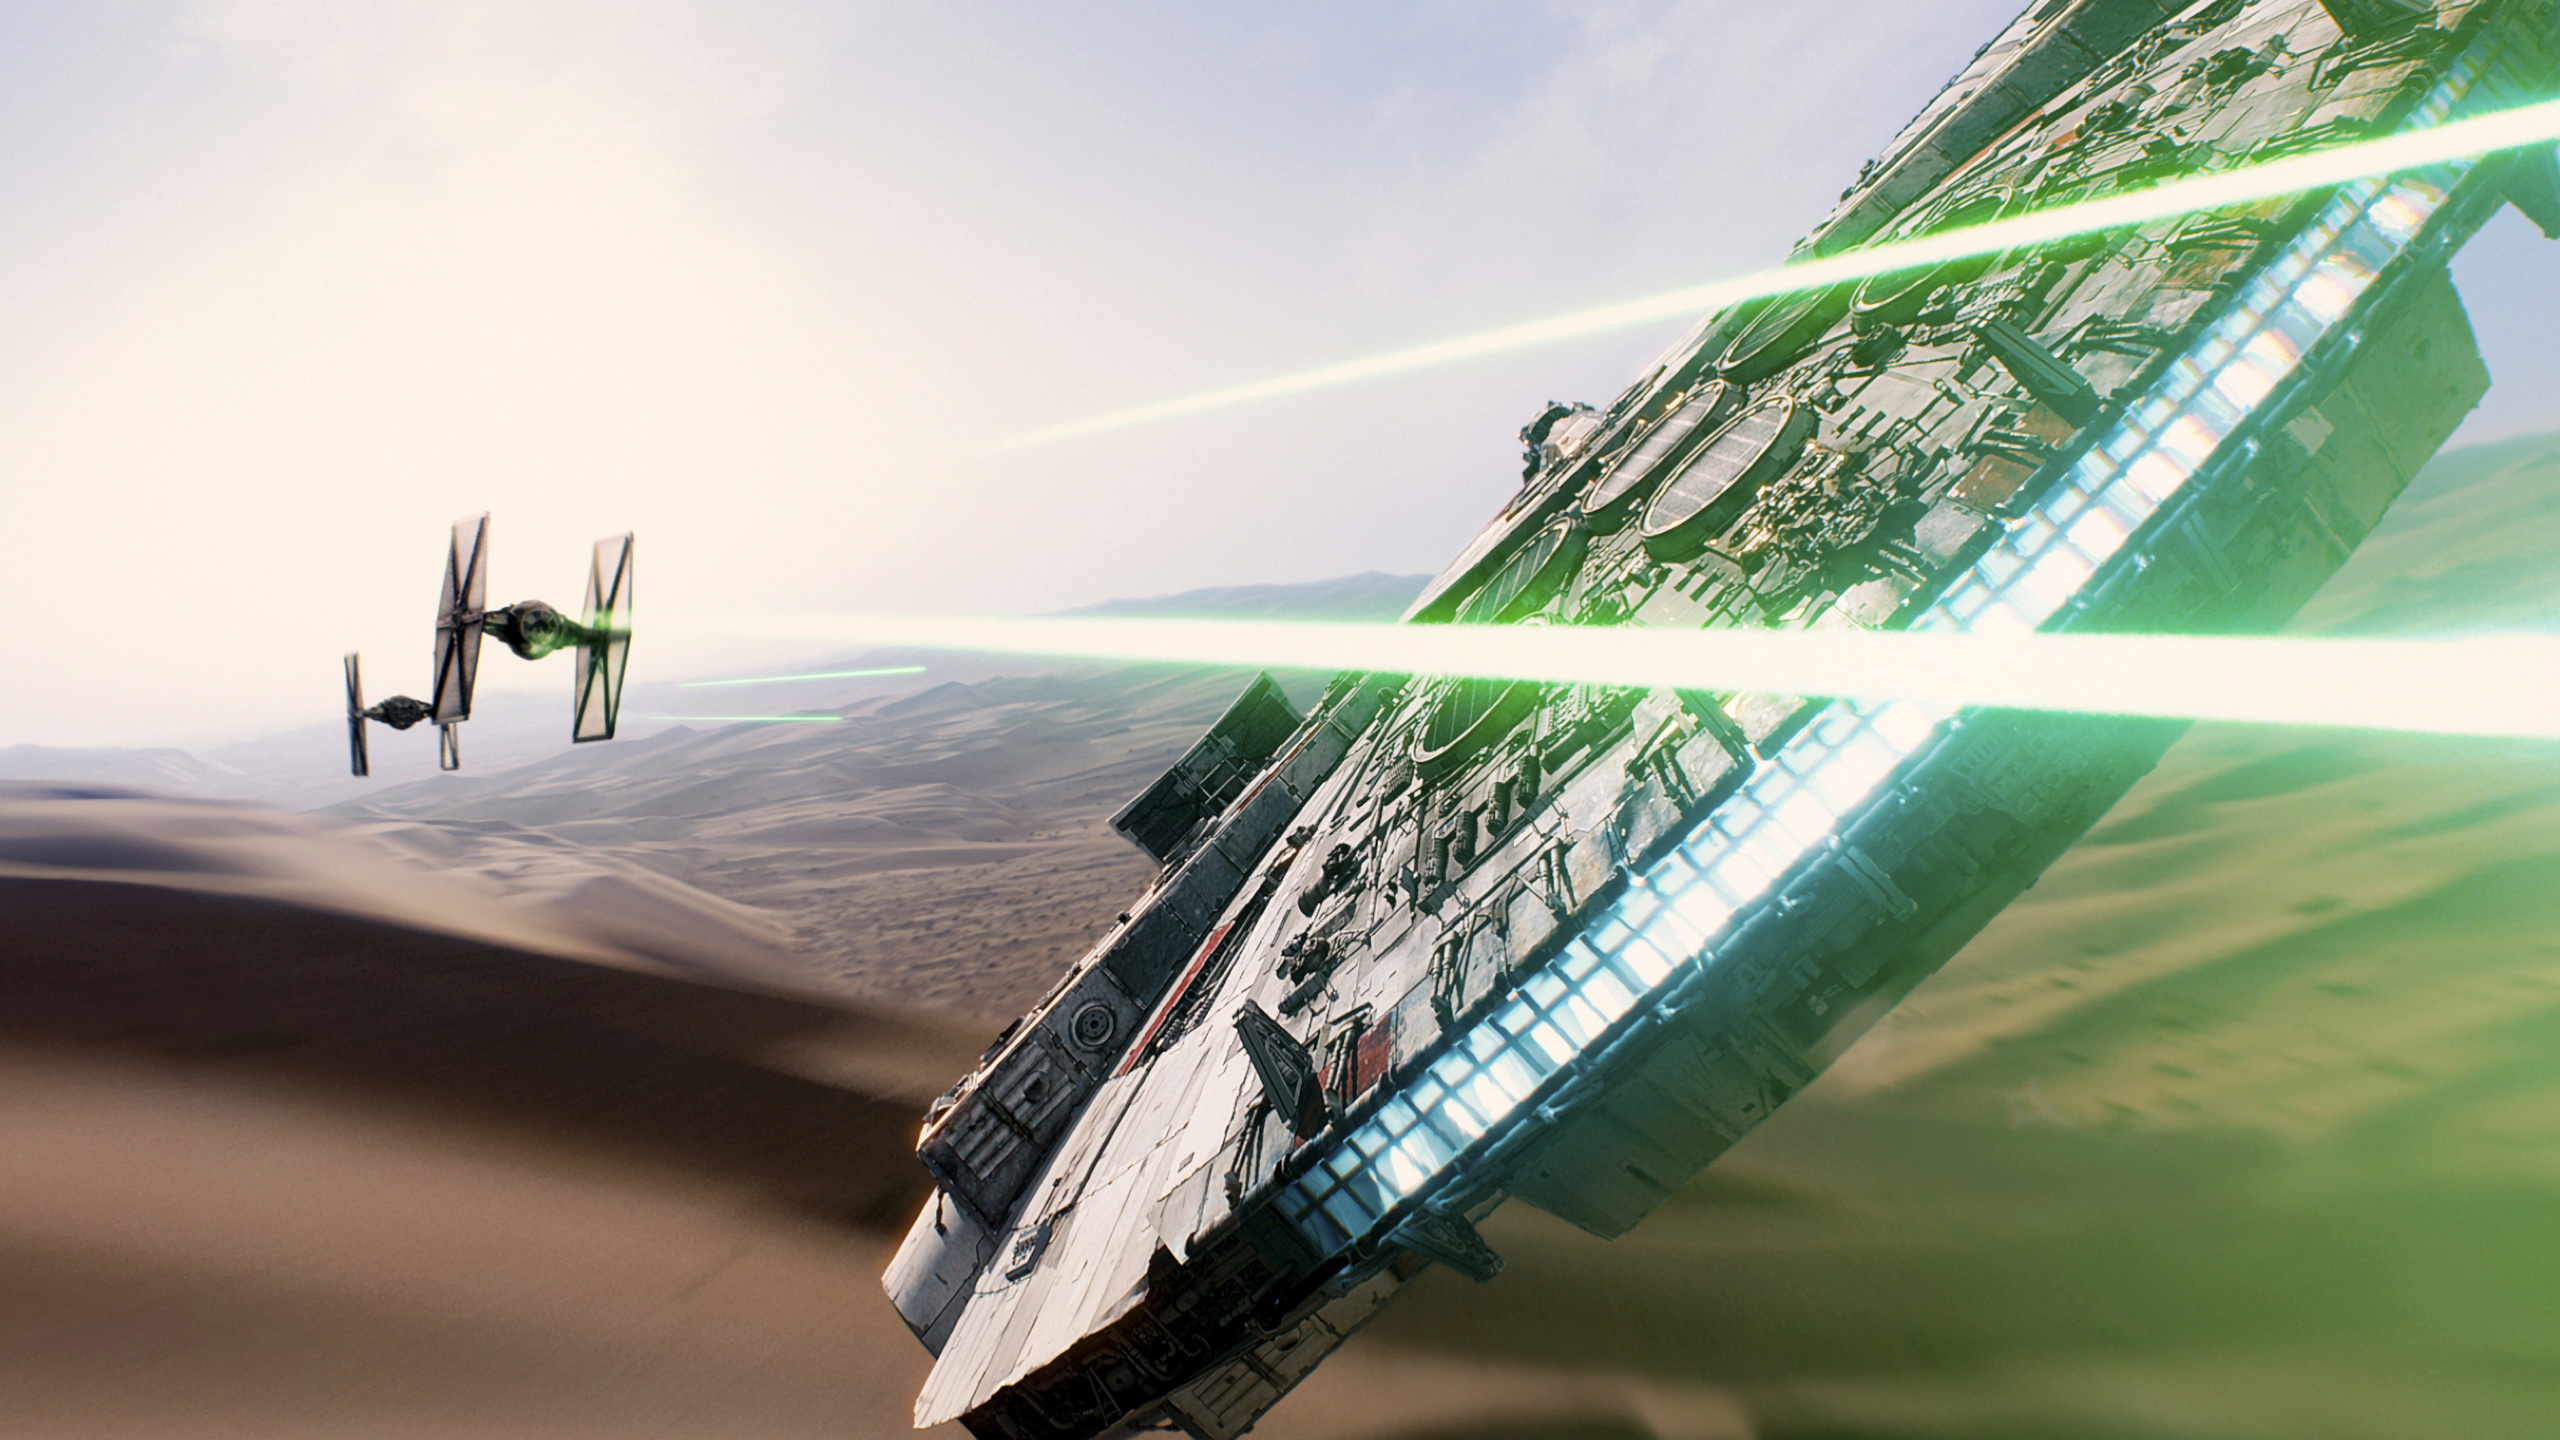 Millennium Falcon, Star Wars, Wing, The Force, Air Travel. Wallpaper in 2560x1440 Resolution